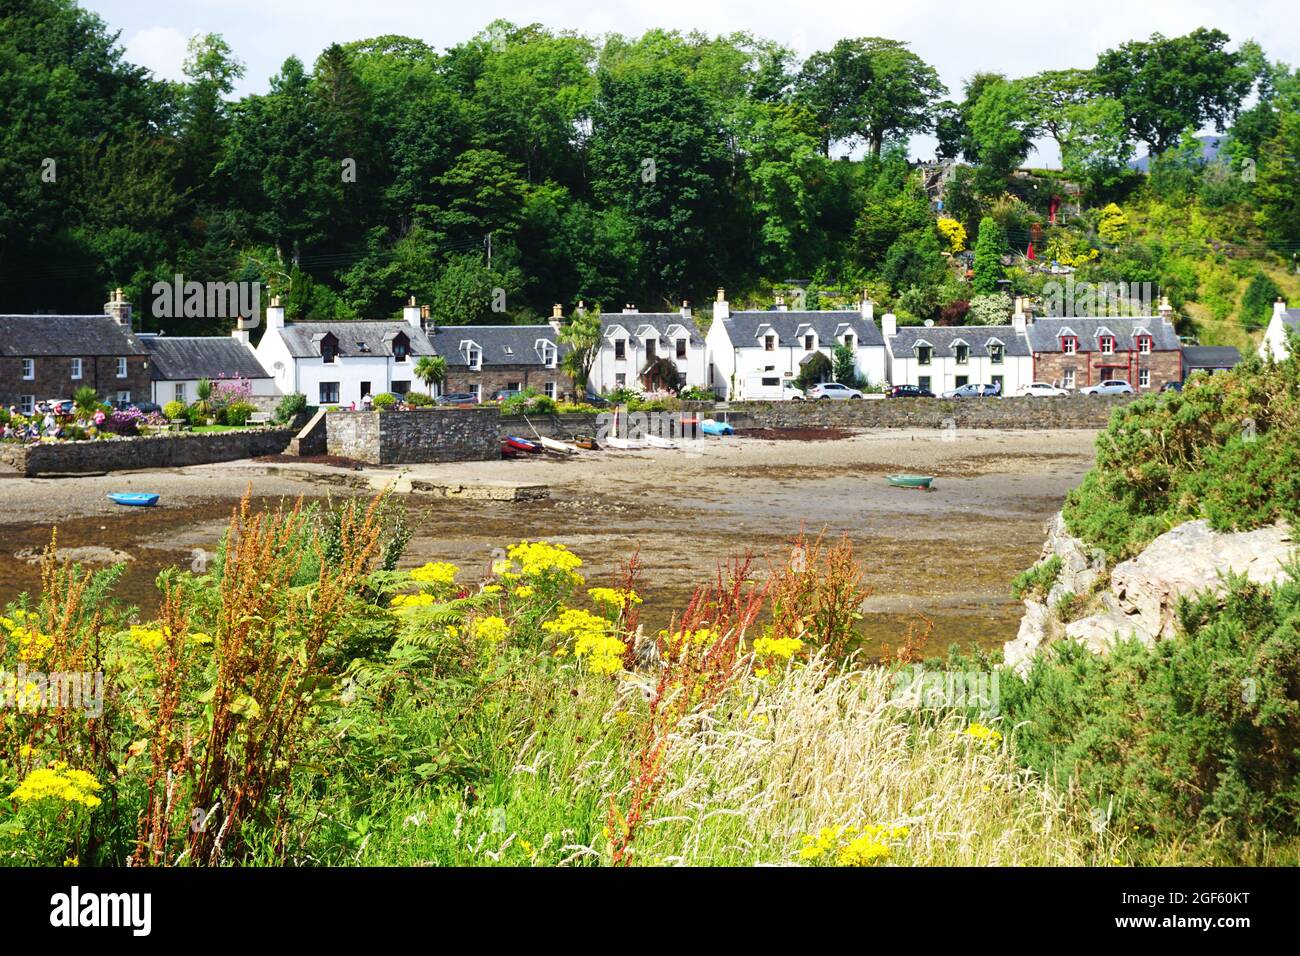 A row of historic whitewashed buildings lines the shore in the Village of Plockton as low tide reveals the muddy tideflats in the middle distance Stock Photo